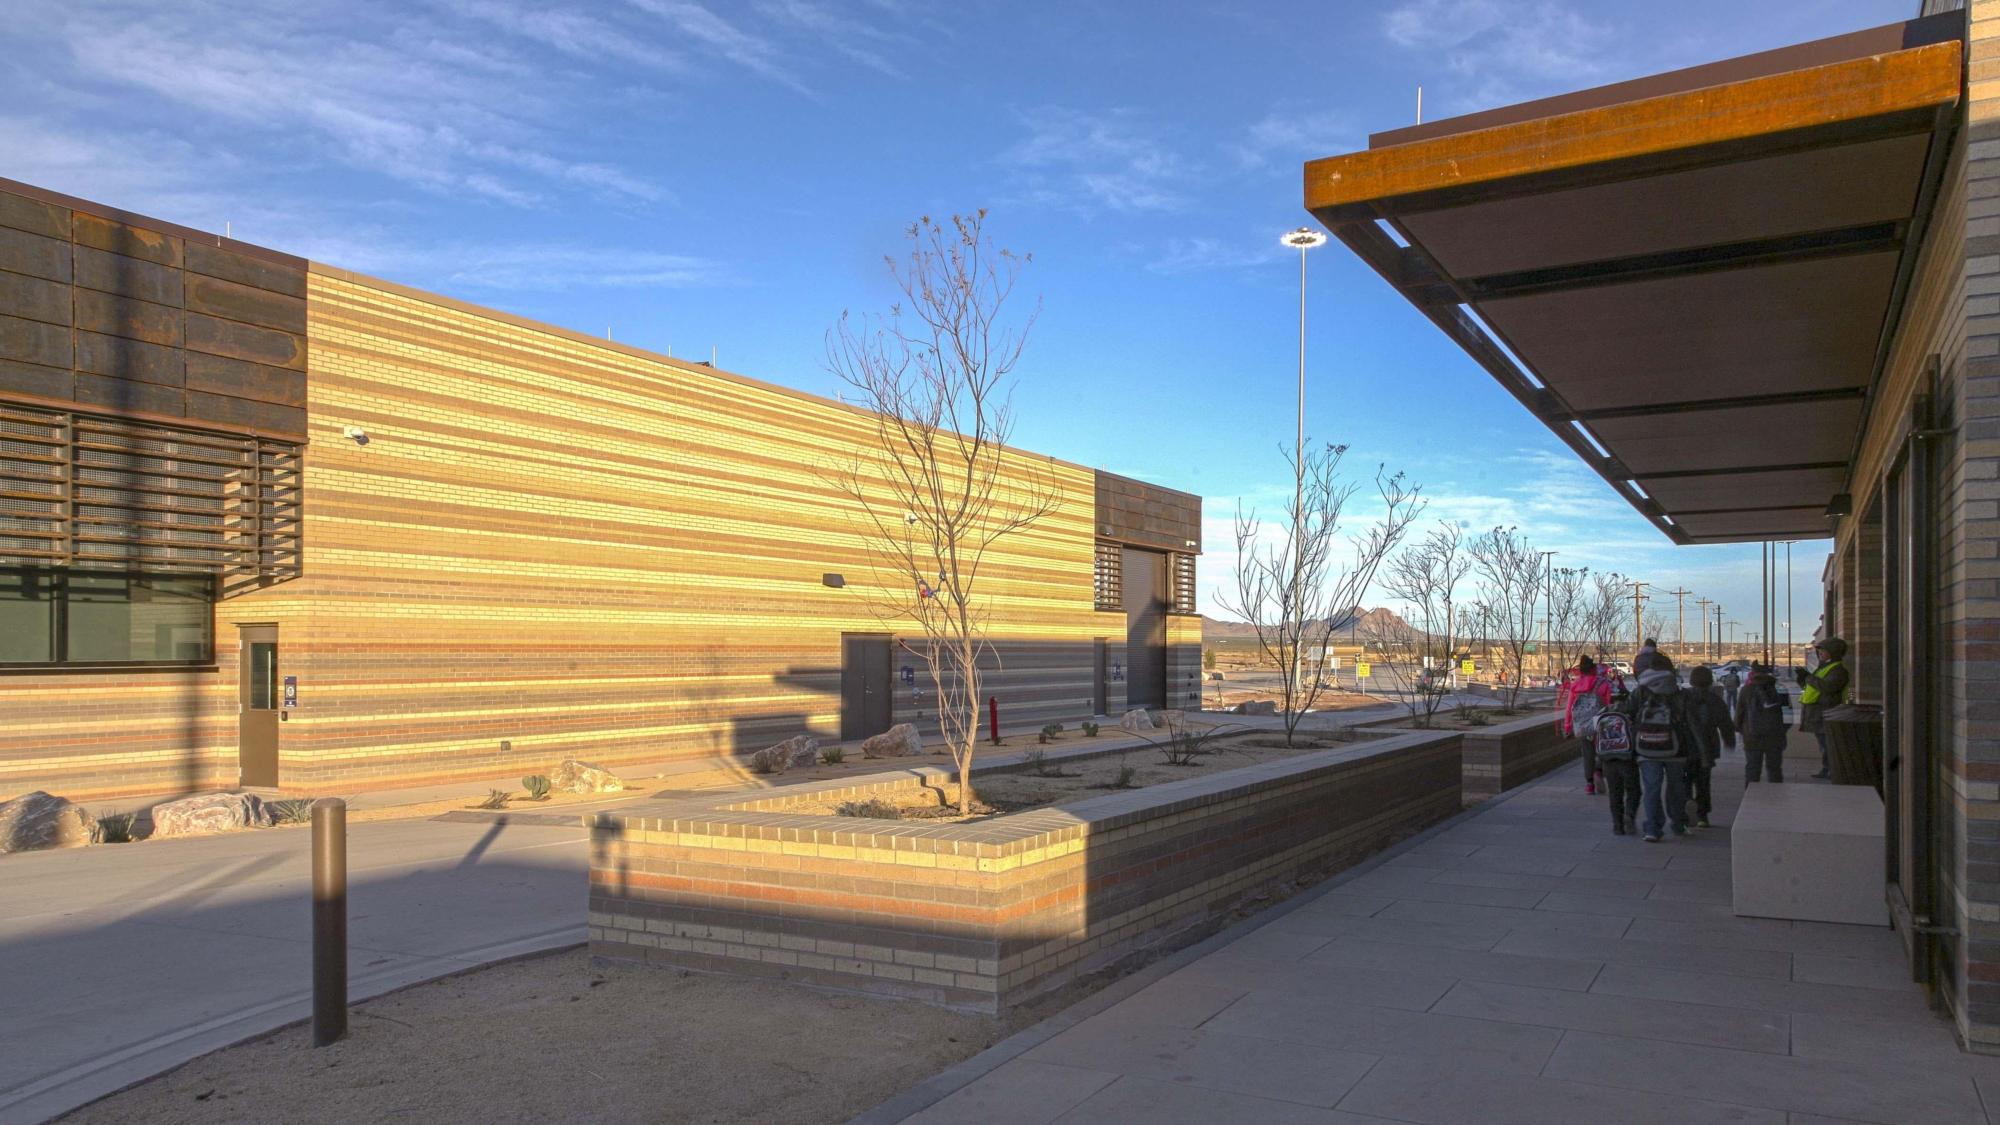 Image of the outside of the brown and beige bricked United States Land Port of Entry